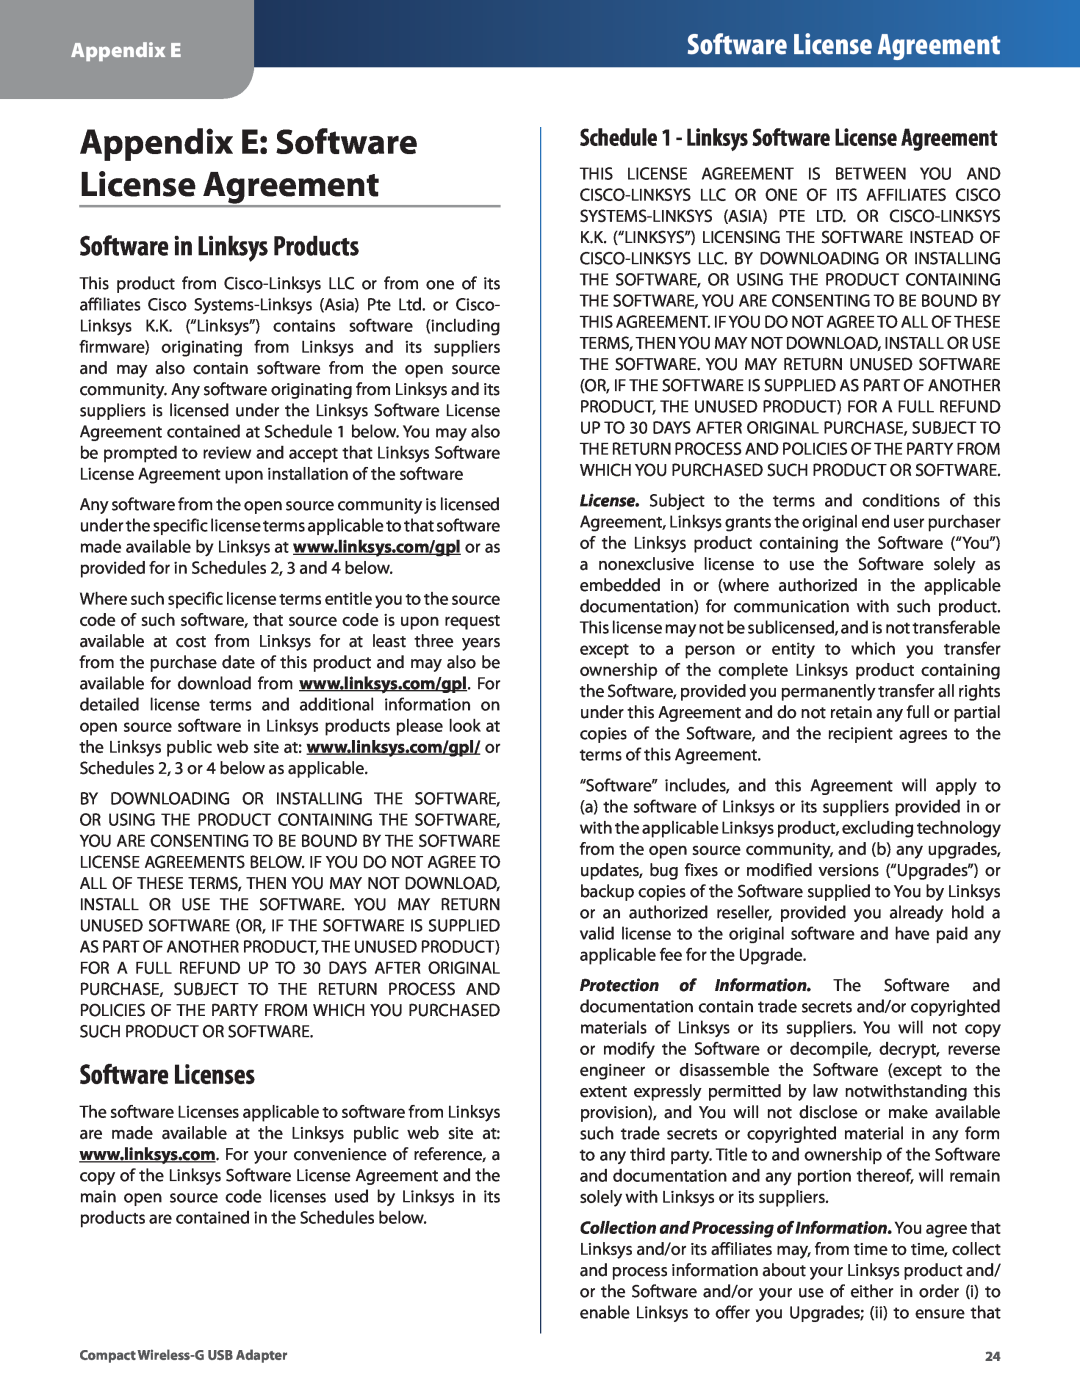 Cisco Systems WUSB54GC manual Appendix E Software License Agreement, Software in Linksys Products, Software Licenses 